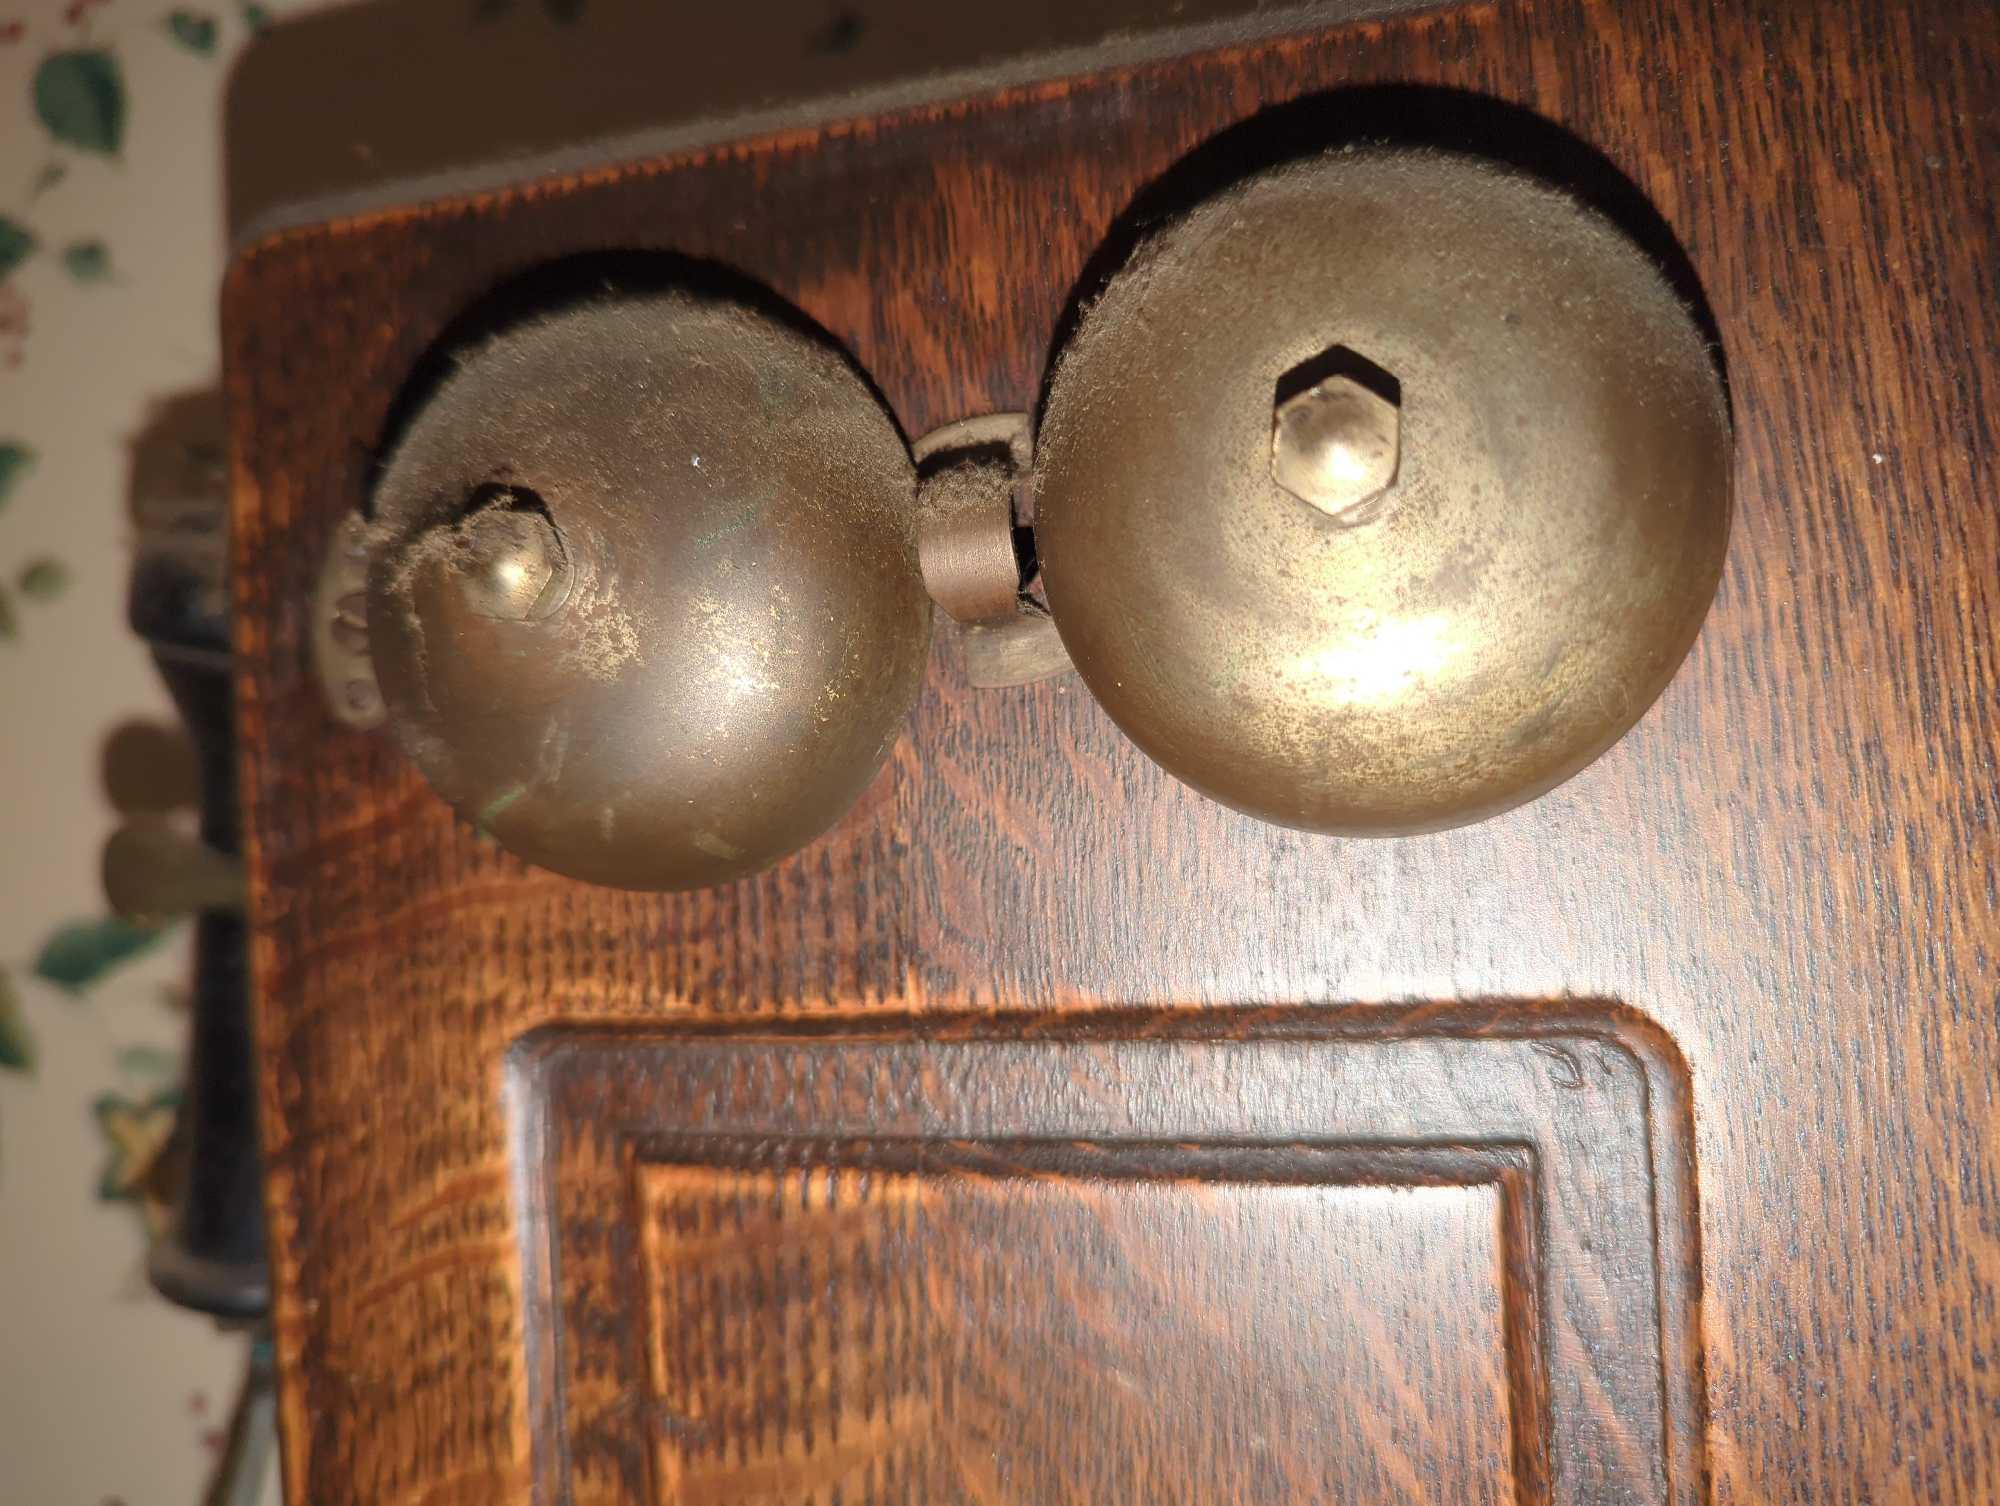 (DR) AMERICAN ELECTRIC TELEPHONE CO. OLD STYLE WALL PHONE, APPROXIMATE DIMENSIONS - 24" H X 13" W X